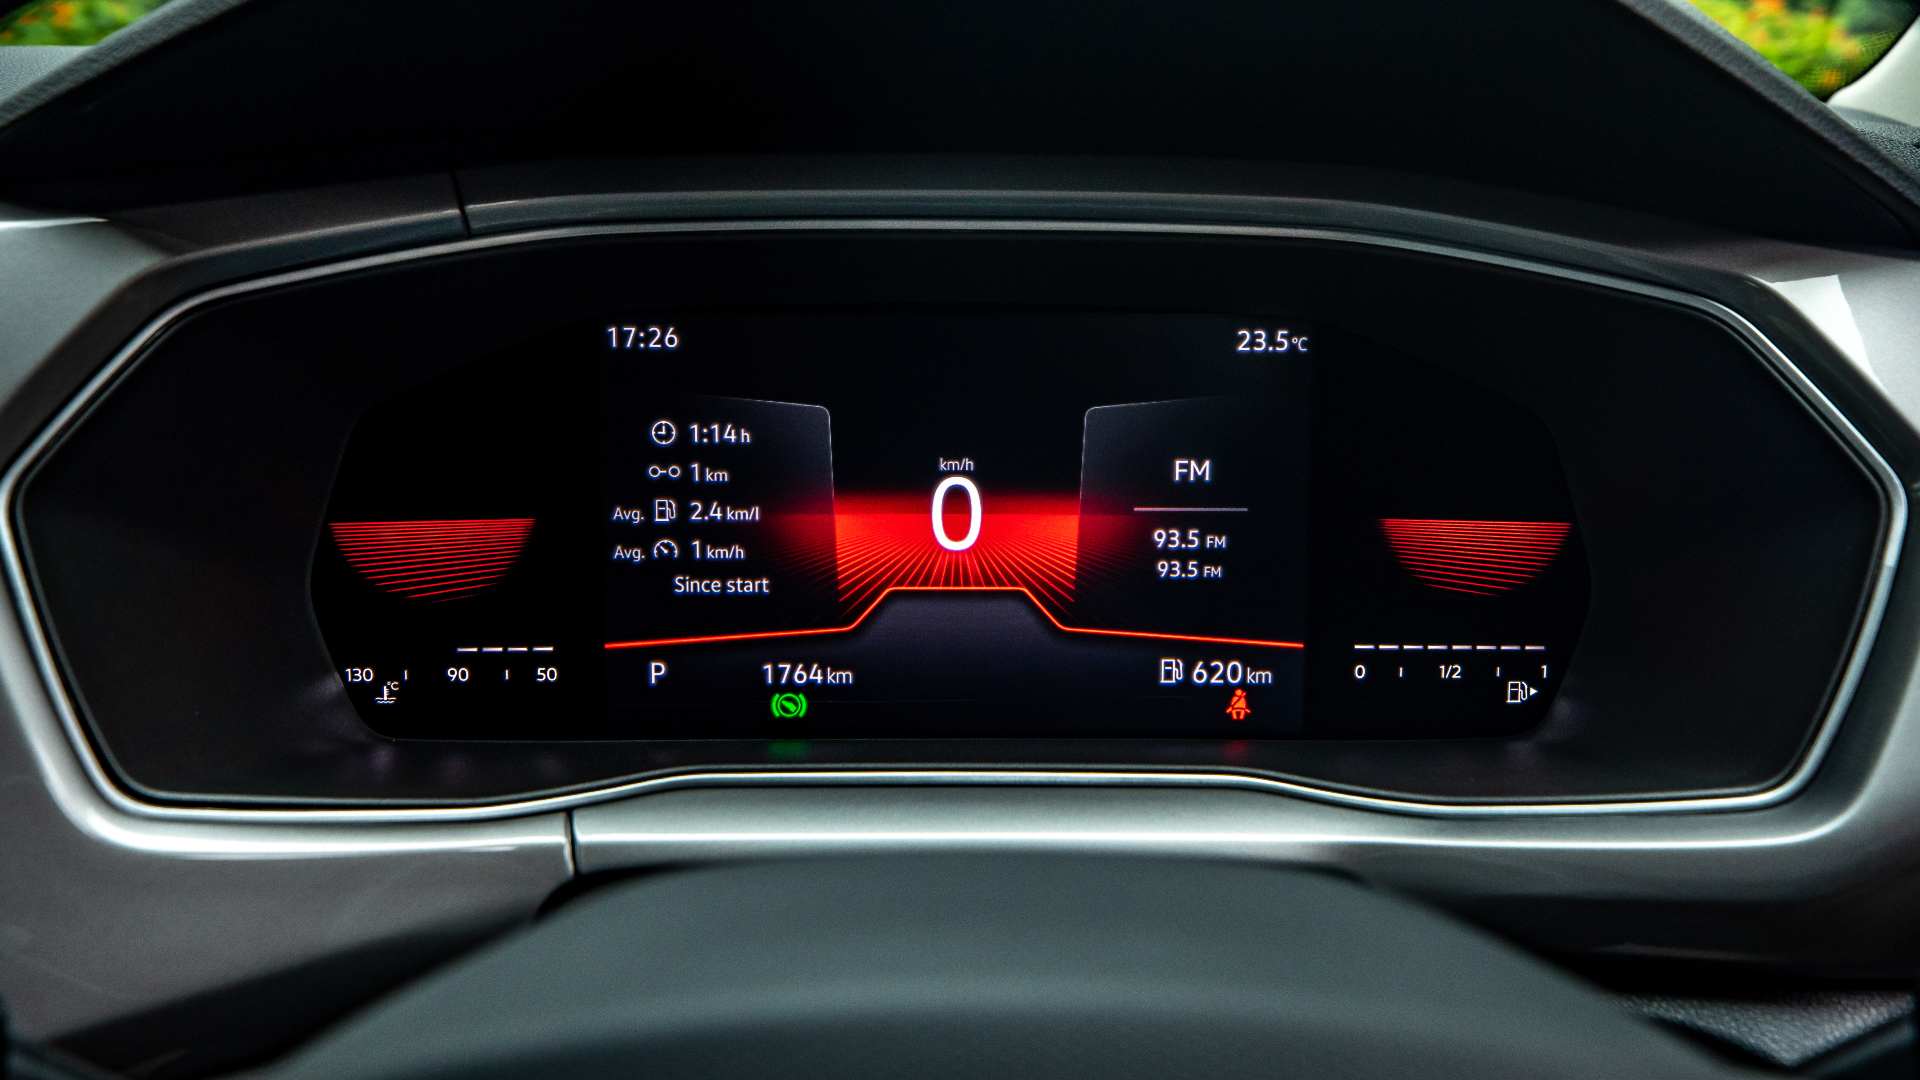 8.0-inch 'Virtual Cockpit' digital instruments display exclusive to the Taigun for now. Image: Volkswagen